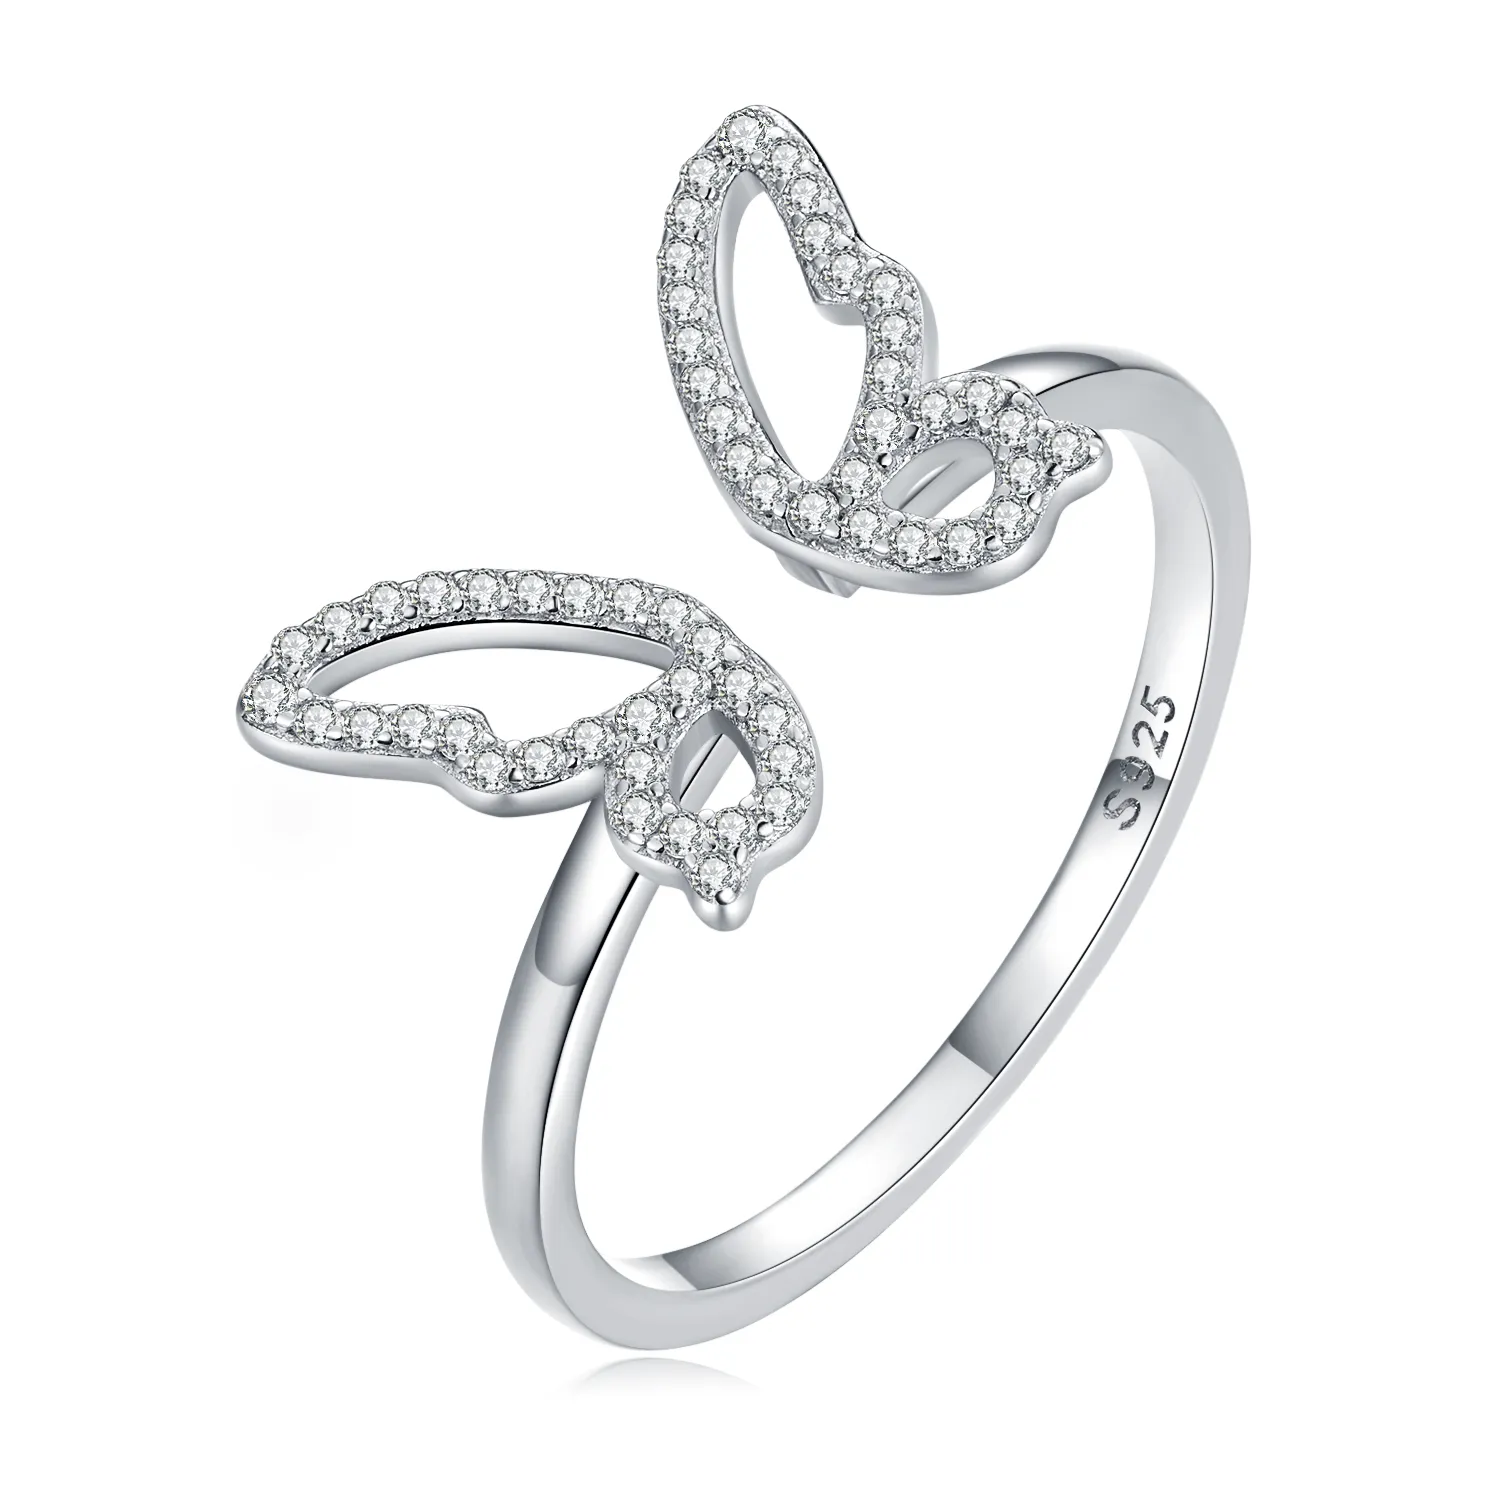 Pandora Style Butterfly Open Ring - BSR278